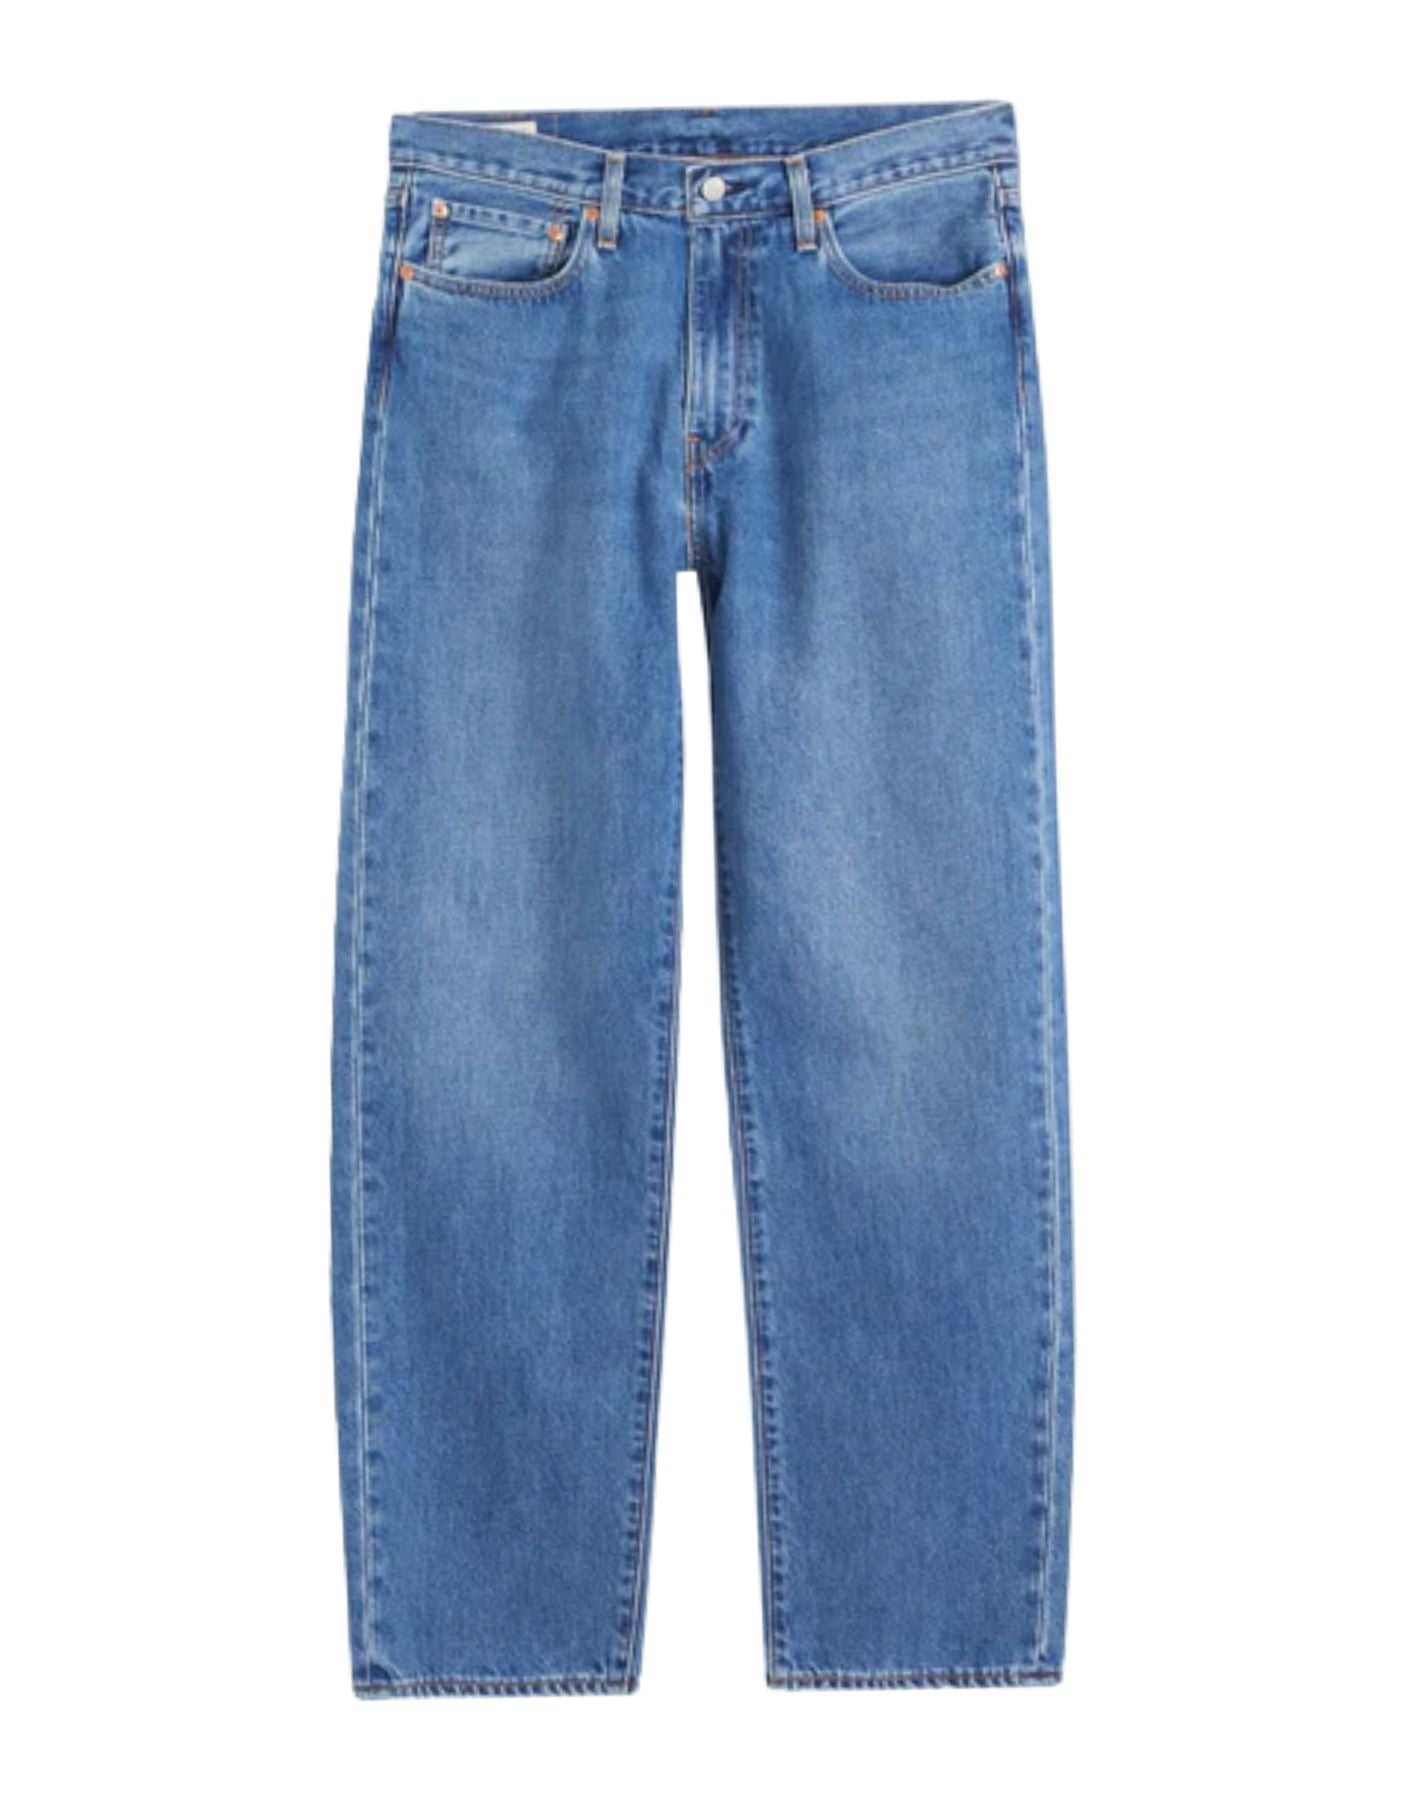 Jeans for man 290370061 Levi's